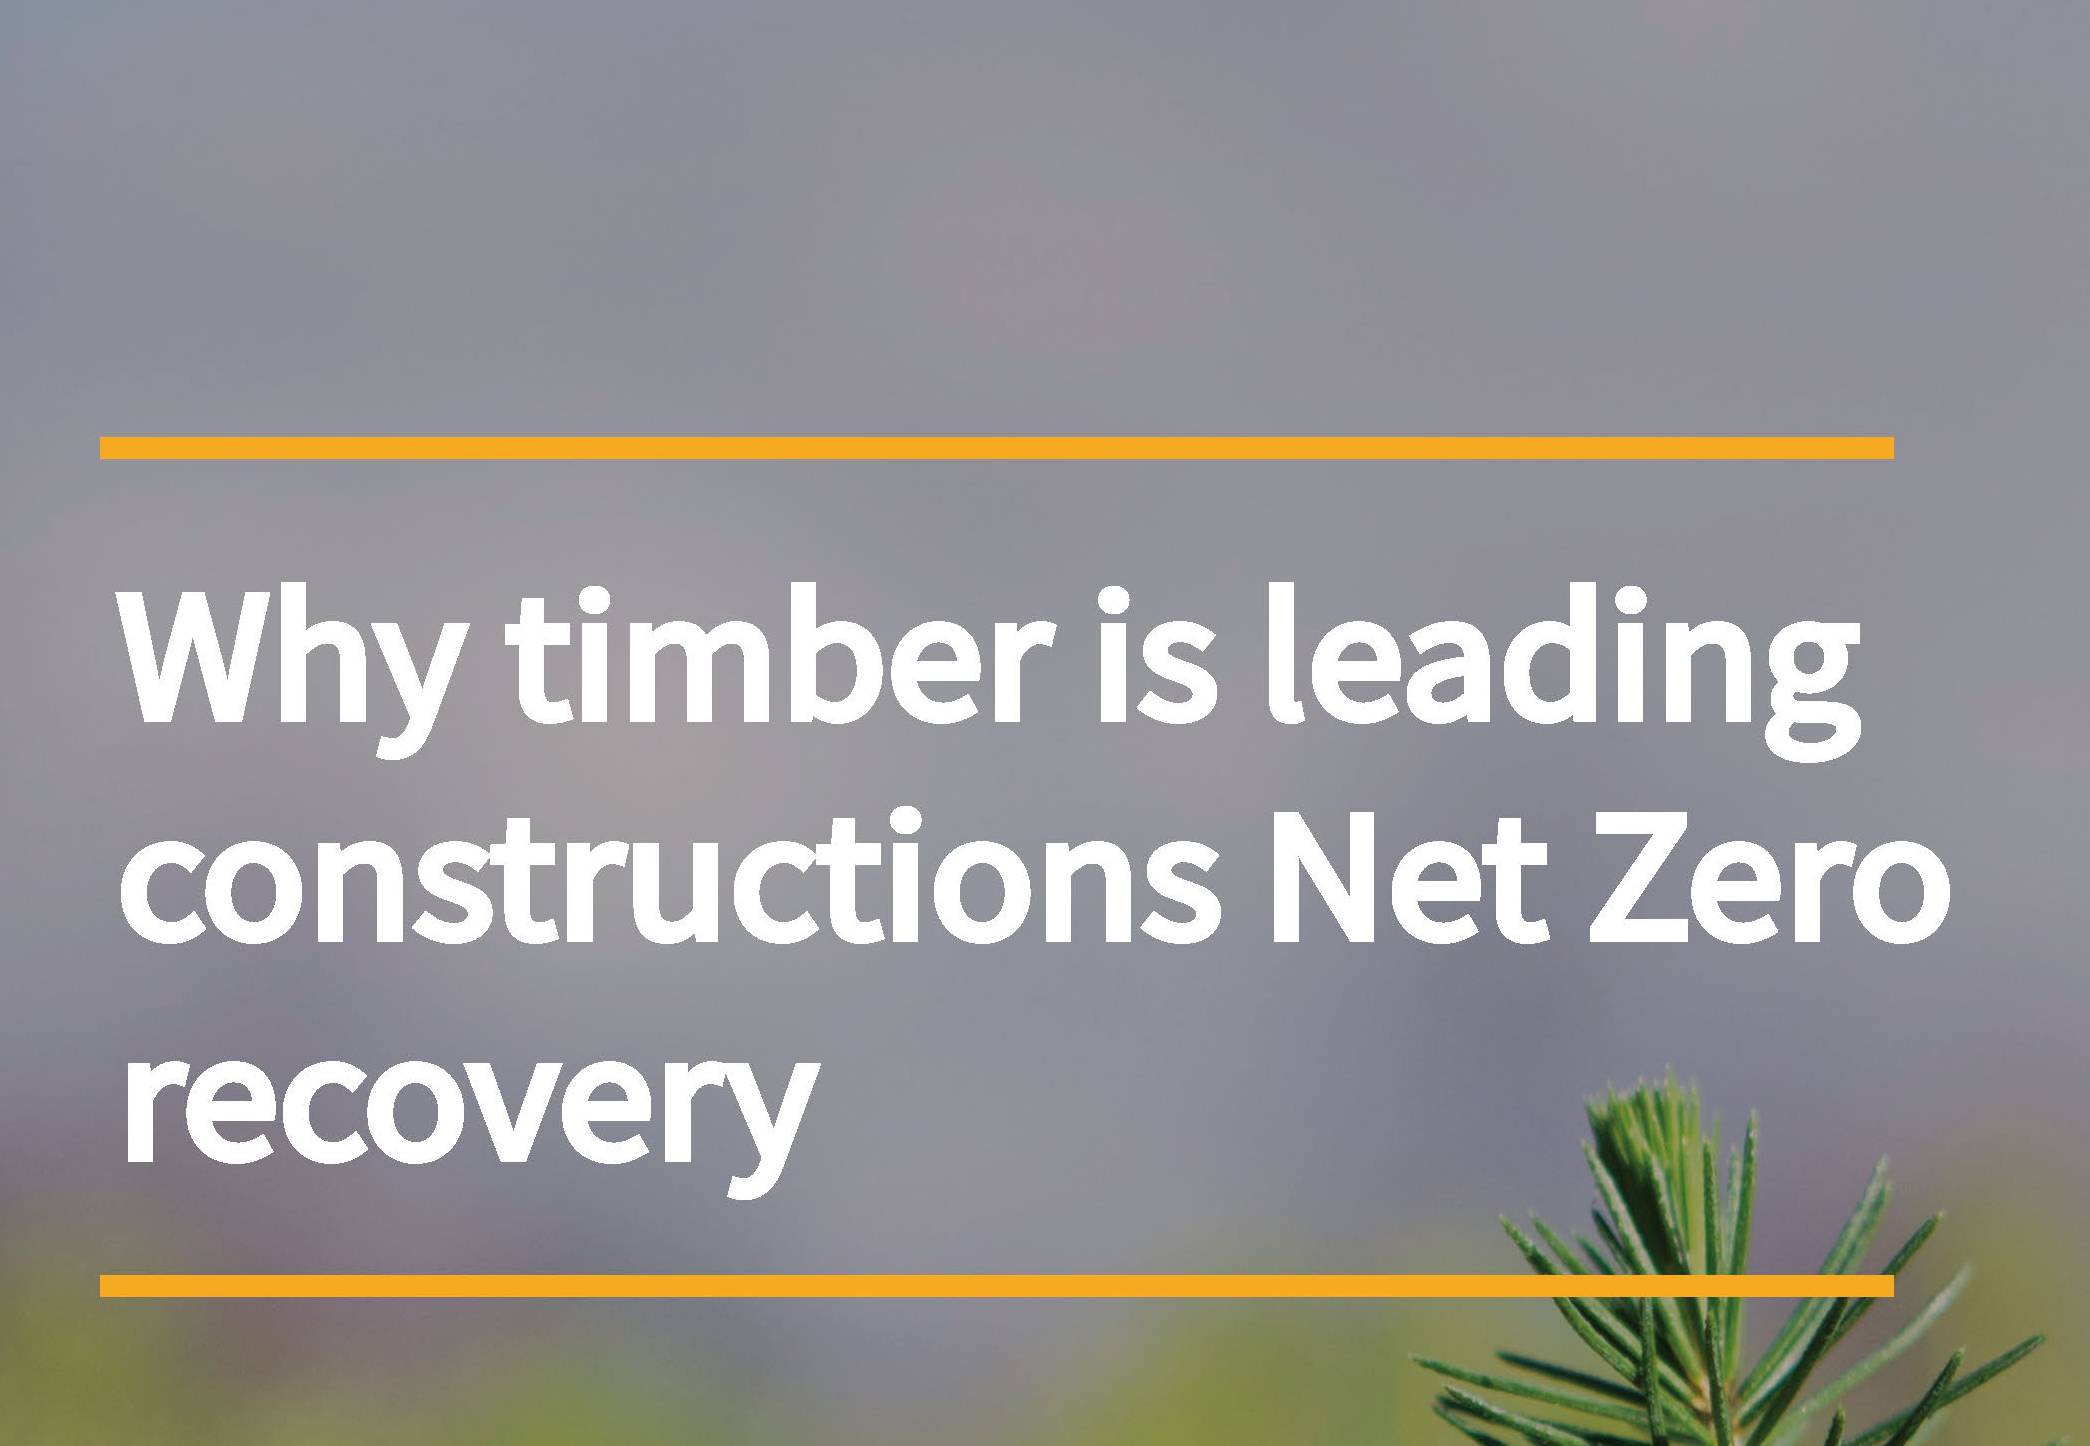 New report from CTI talks timber and the Roadmap to Recovery